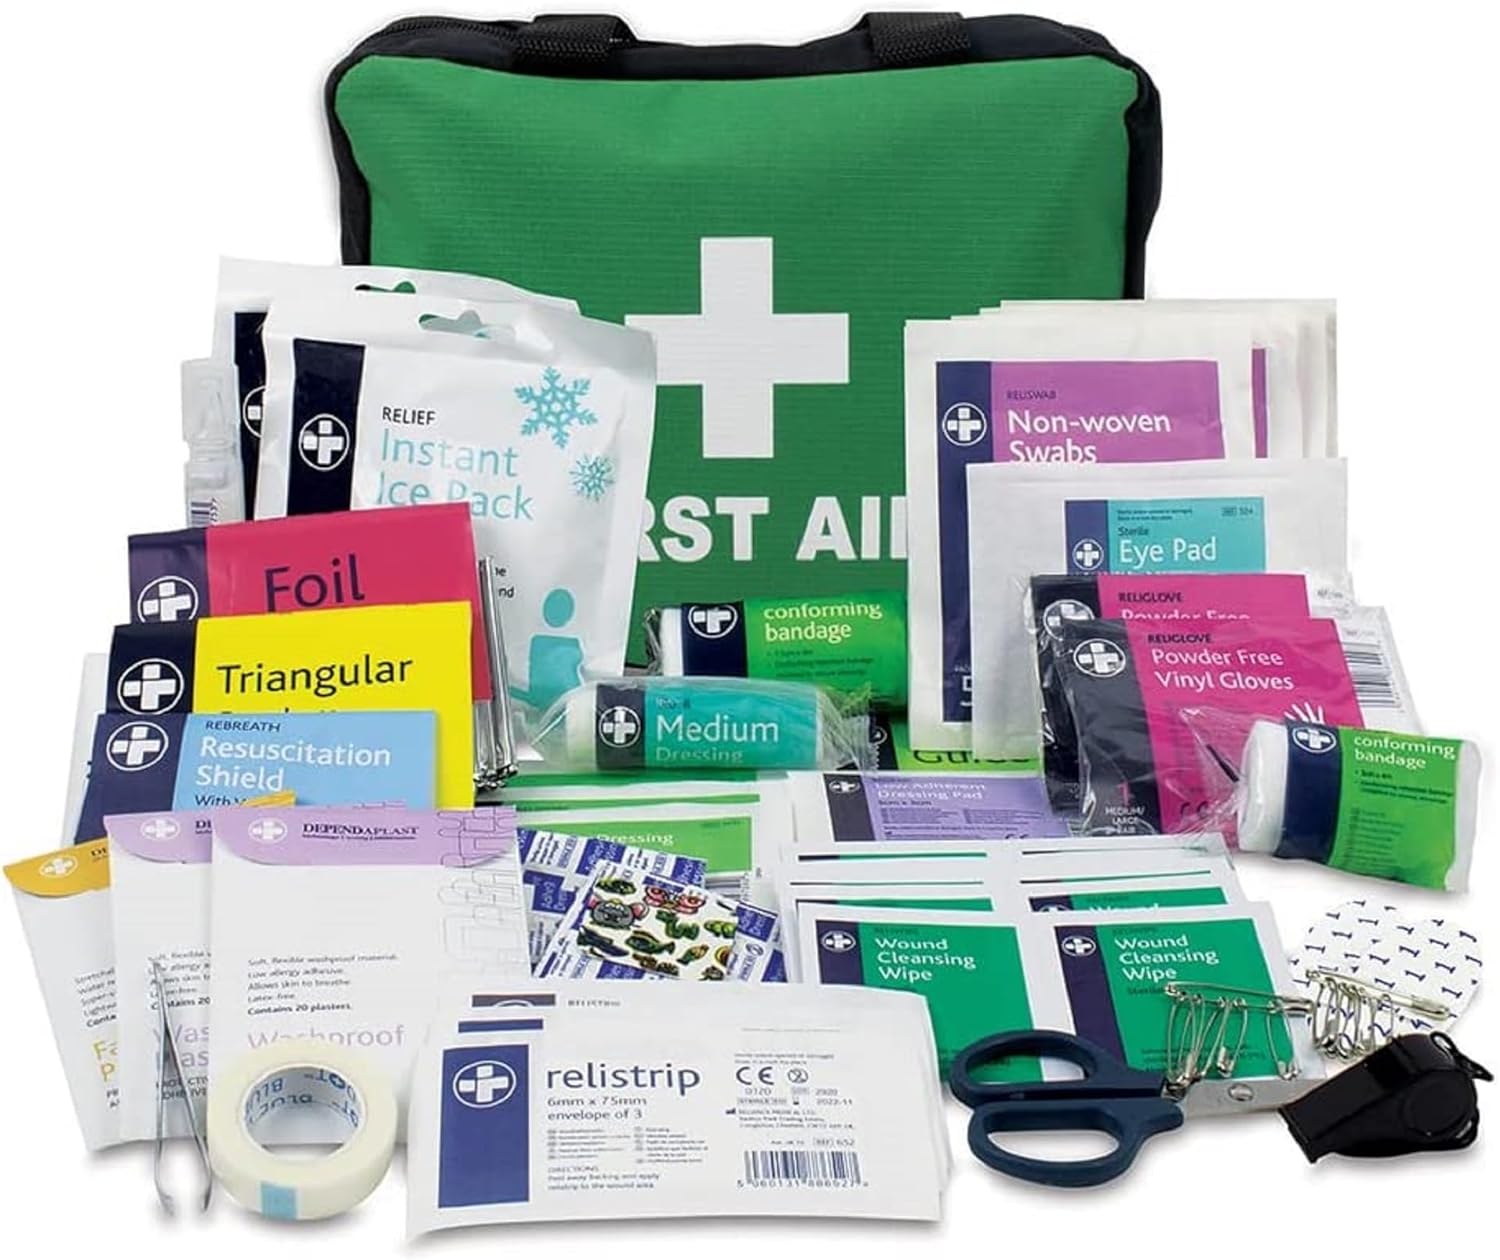 Lewis-Plast First Aid Kit Bag - 160 Piece Survival Kits - Safety Essentials for Travel Car Home Camping Work Hiking Holiday - Pack Supplies - Medium